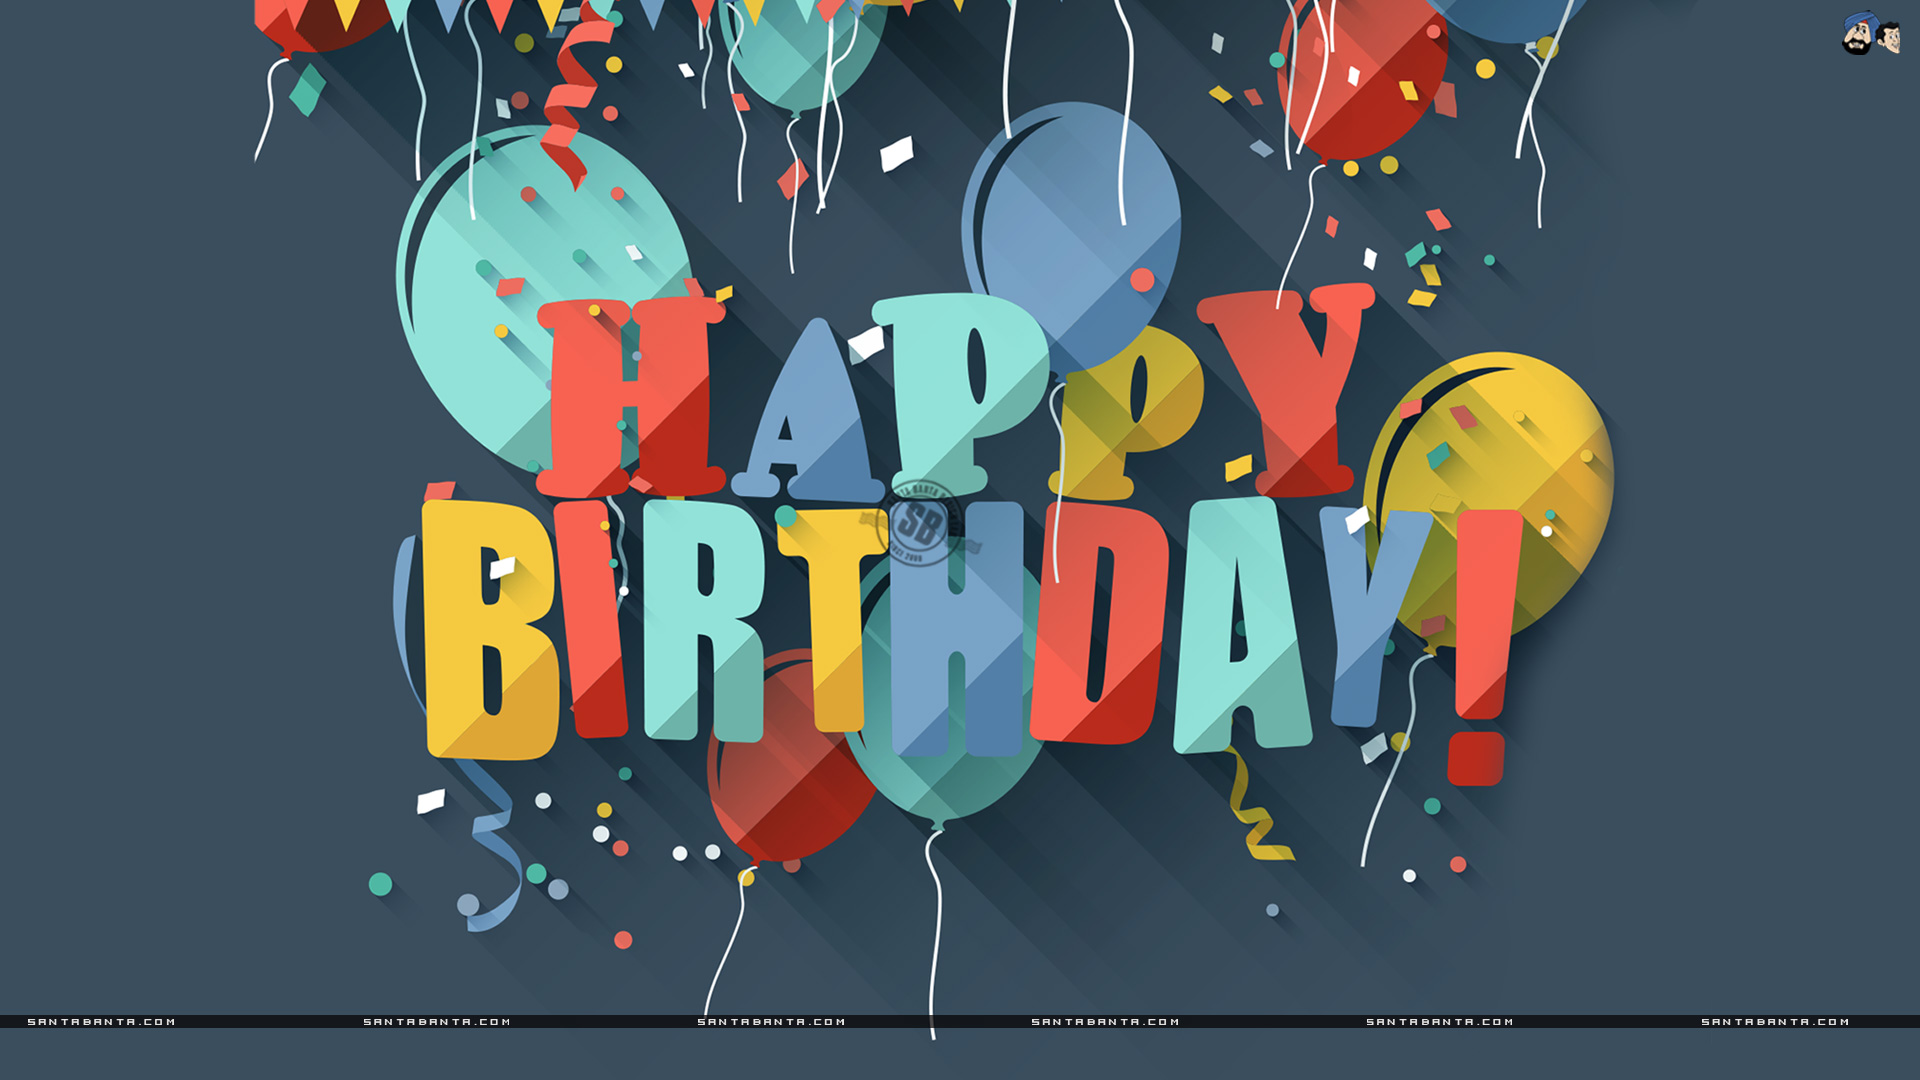 Awesome Happy Birthday Wishes Cards ♥ - Graphic Design - HD Wallpaper 